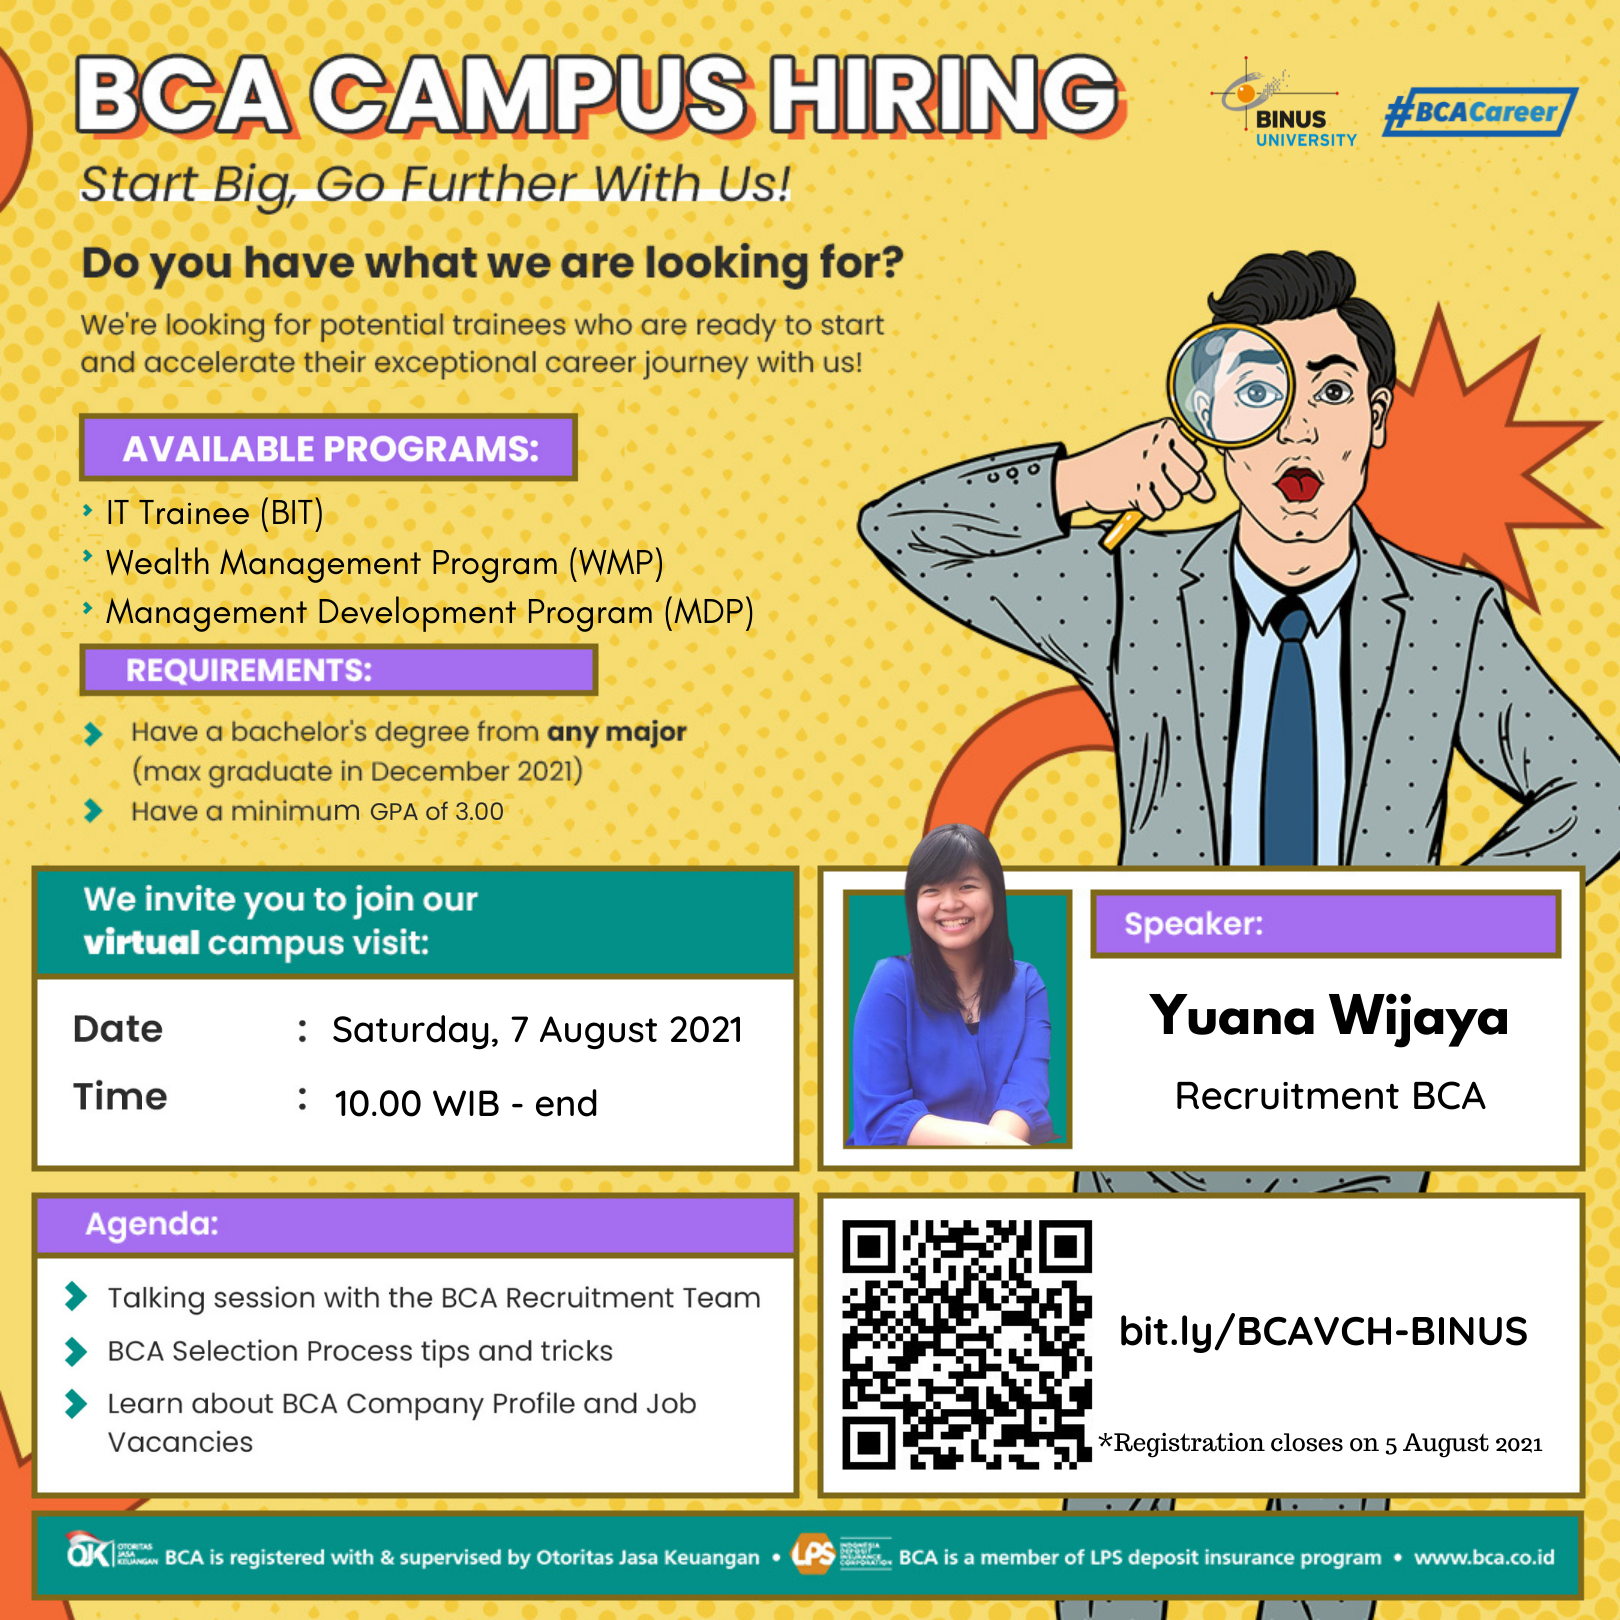 BCA CAMPUS HIRING: START BIG, GO FURTHER WITH US